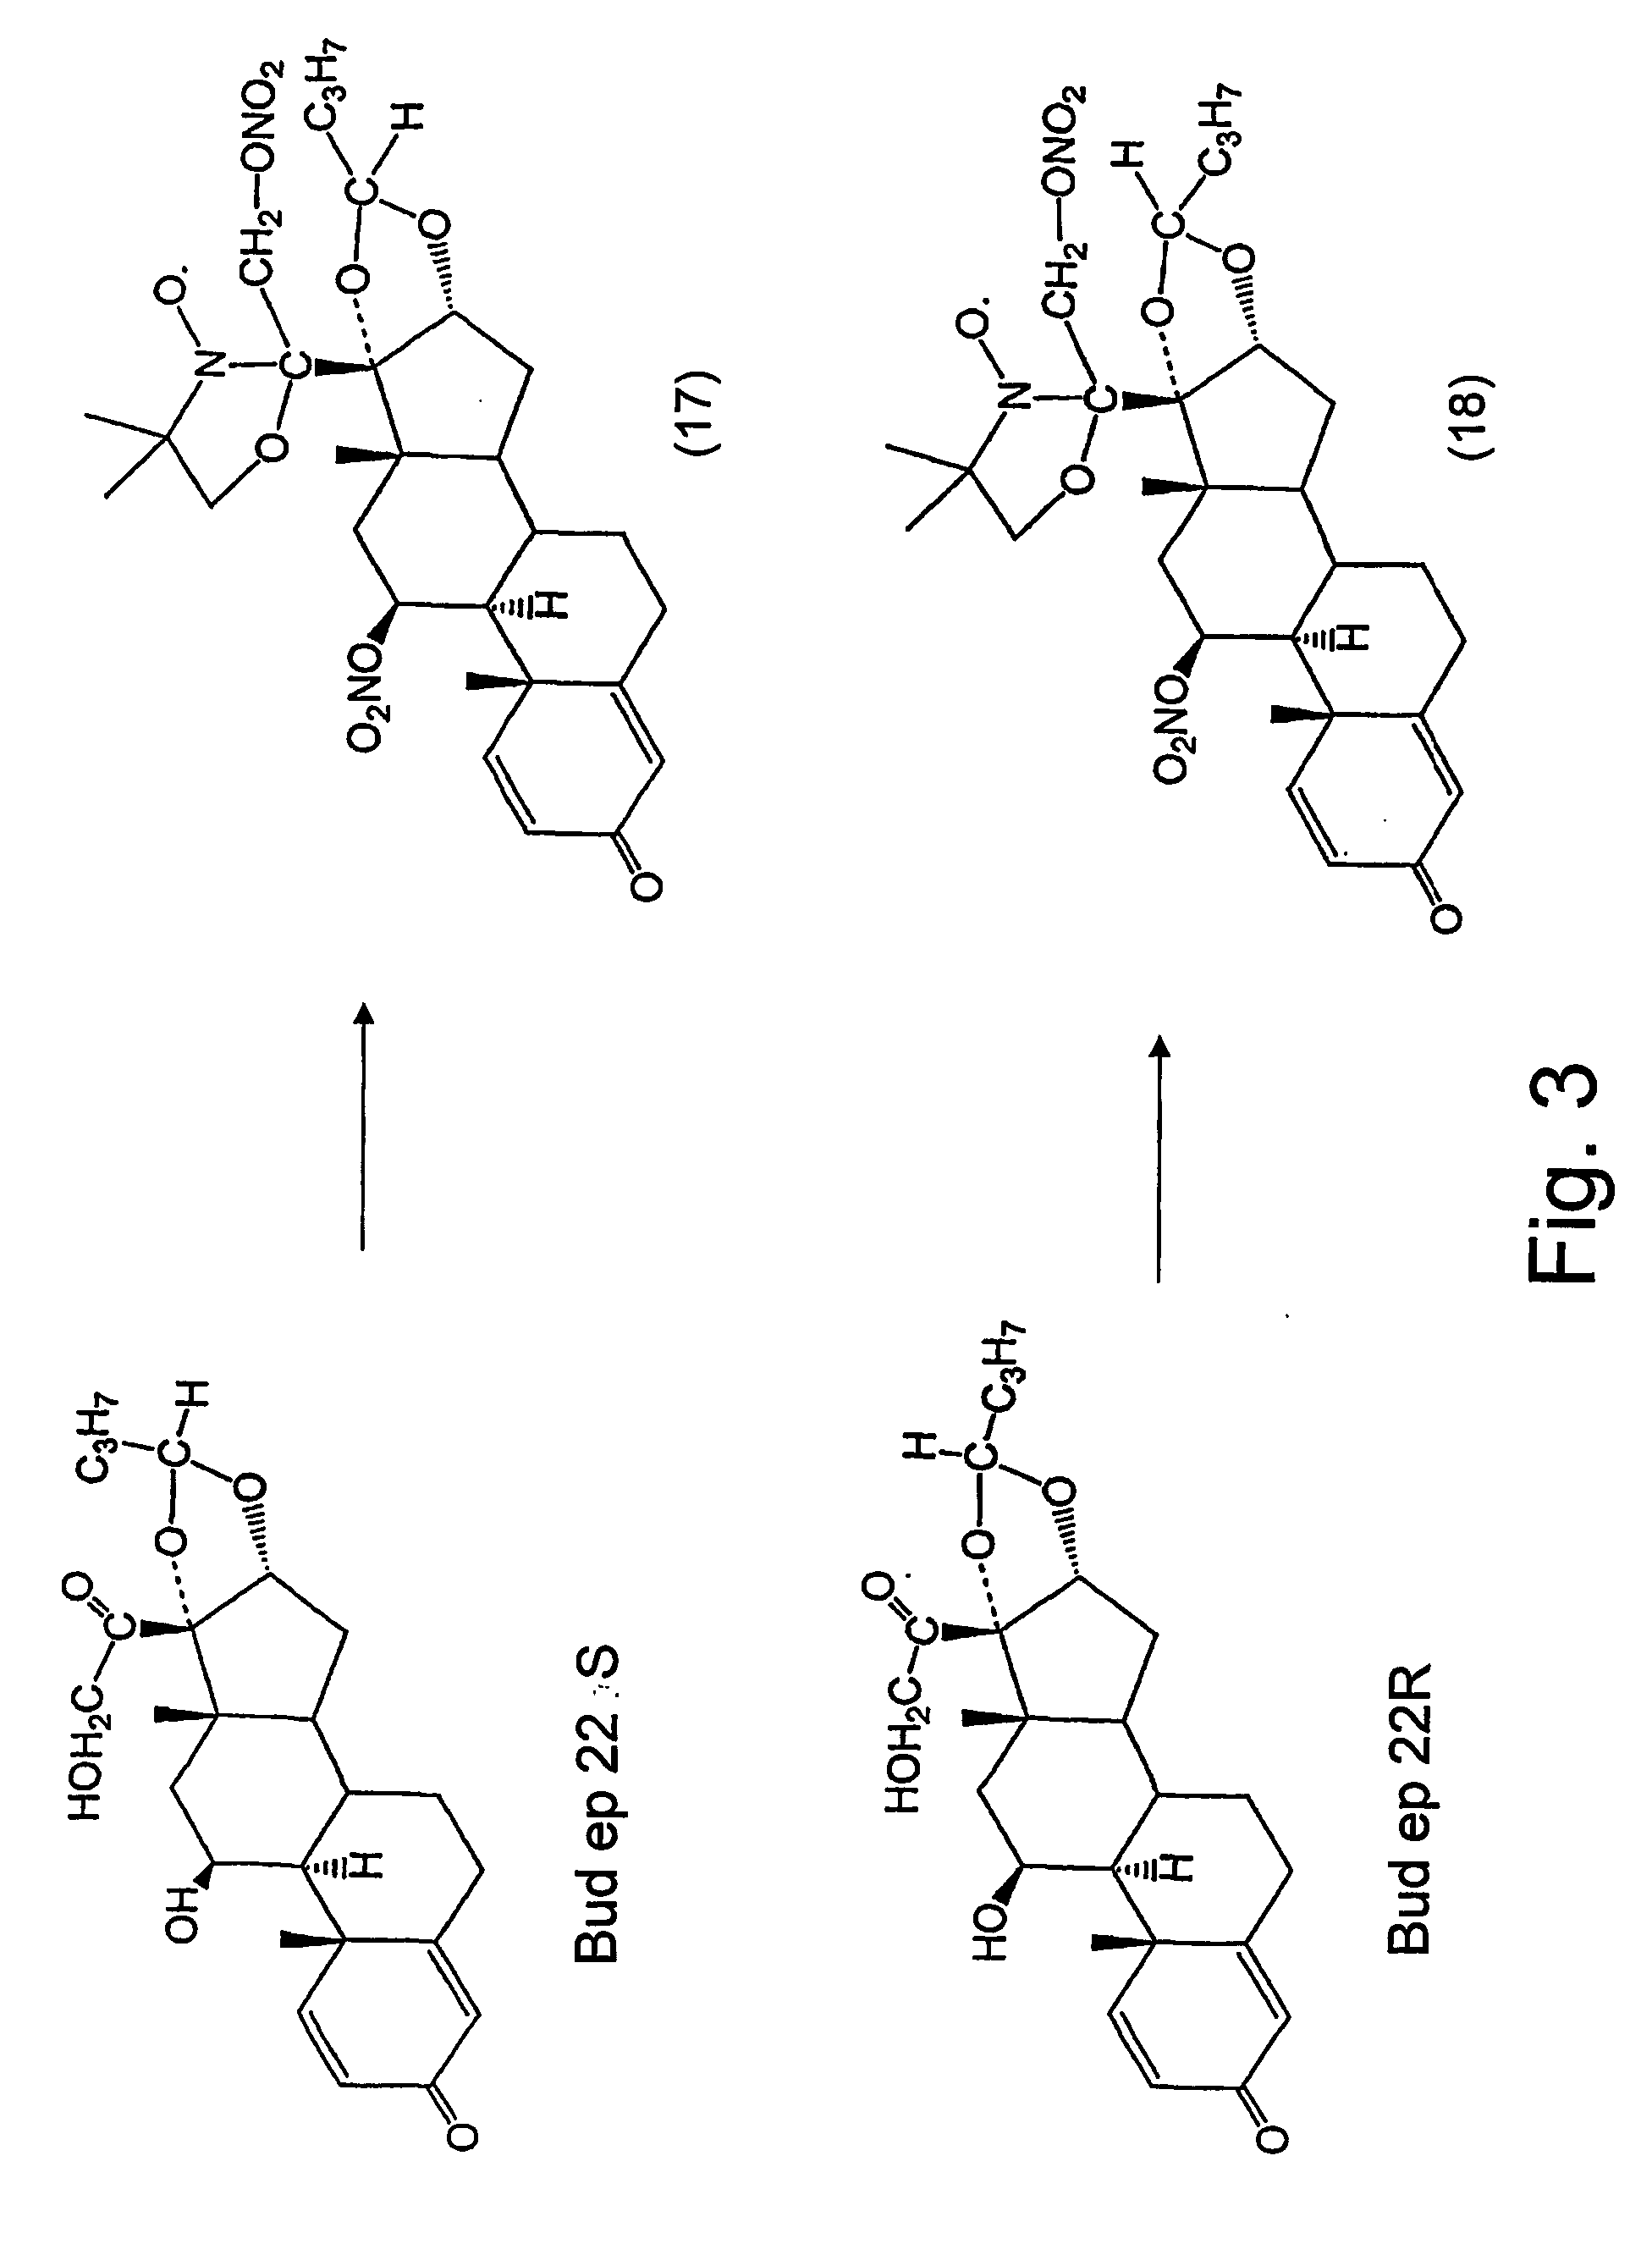 Steroid compounds comprising superoxide dismutase mimic groups and nitric oxide donor groups, and their use in the preparation of medicaments